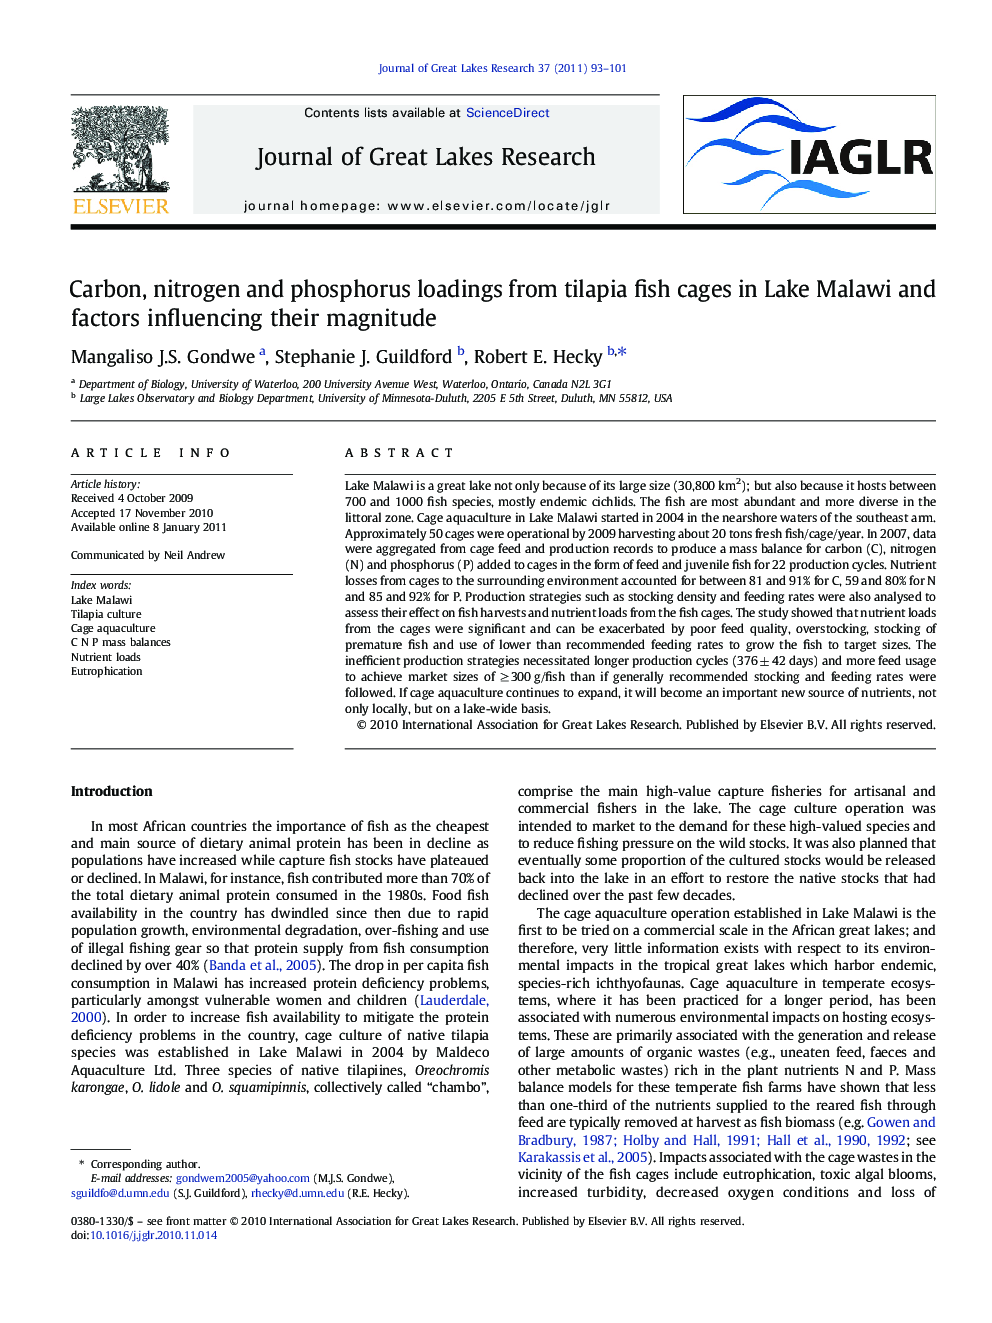 Carbon, nitrogen and phosphorus loadings from tilapia fish cages in Lake Malawi and factors influencing their magnitude